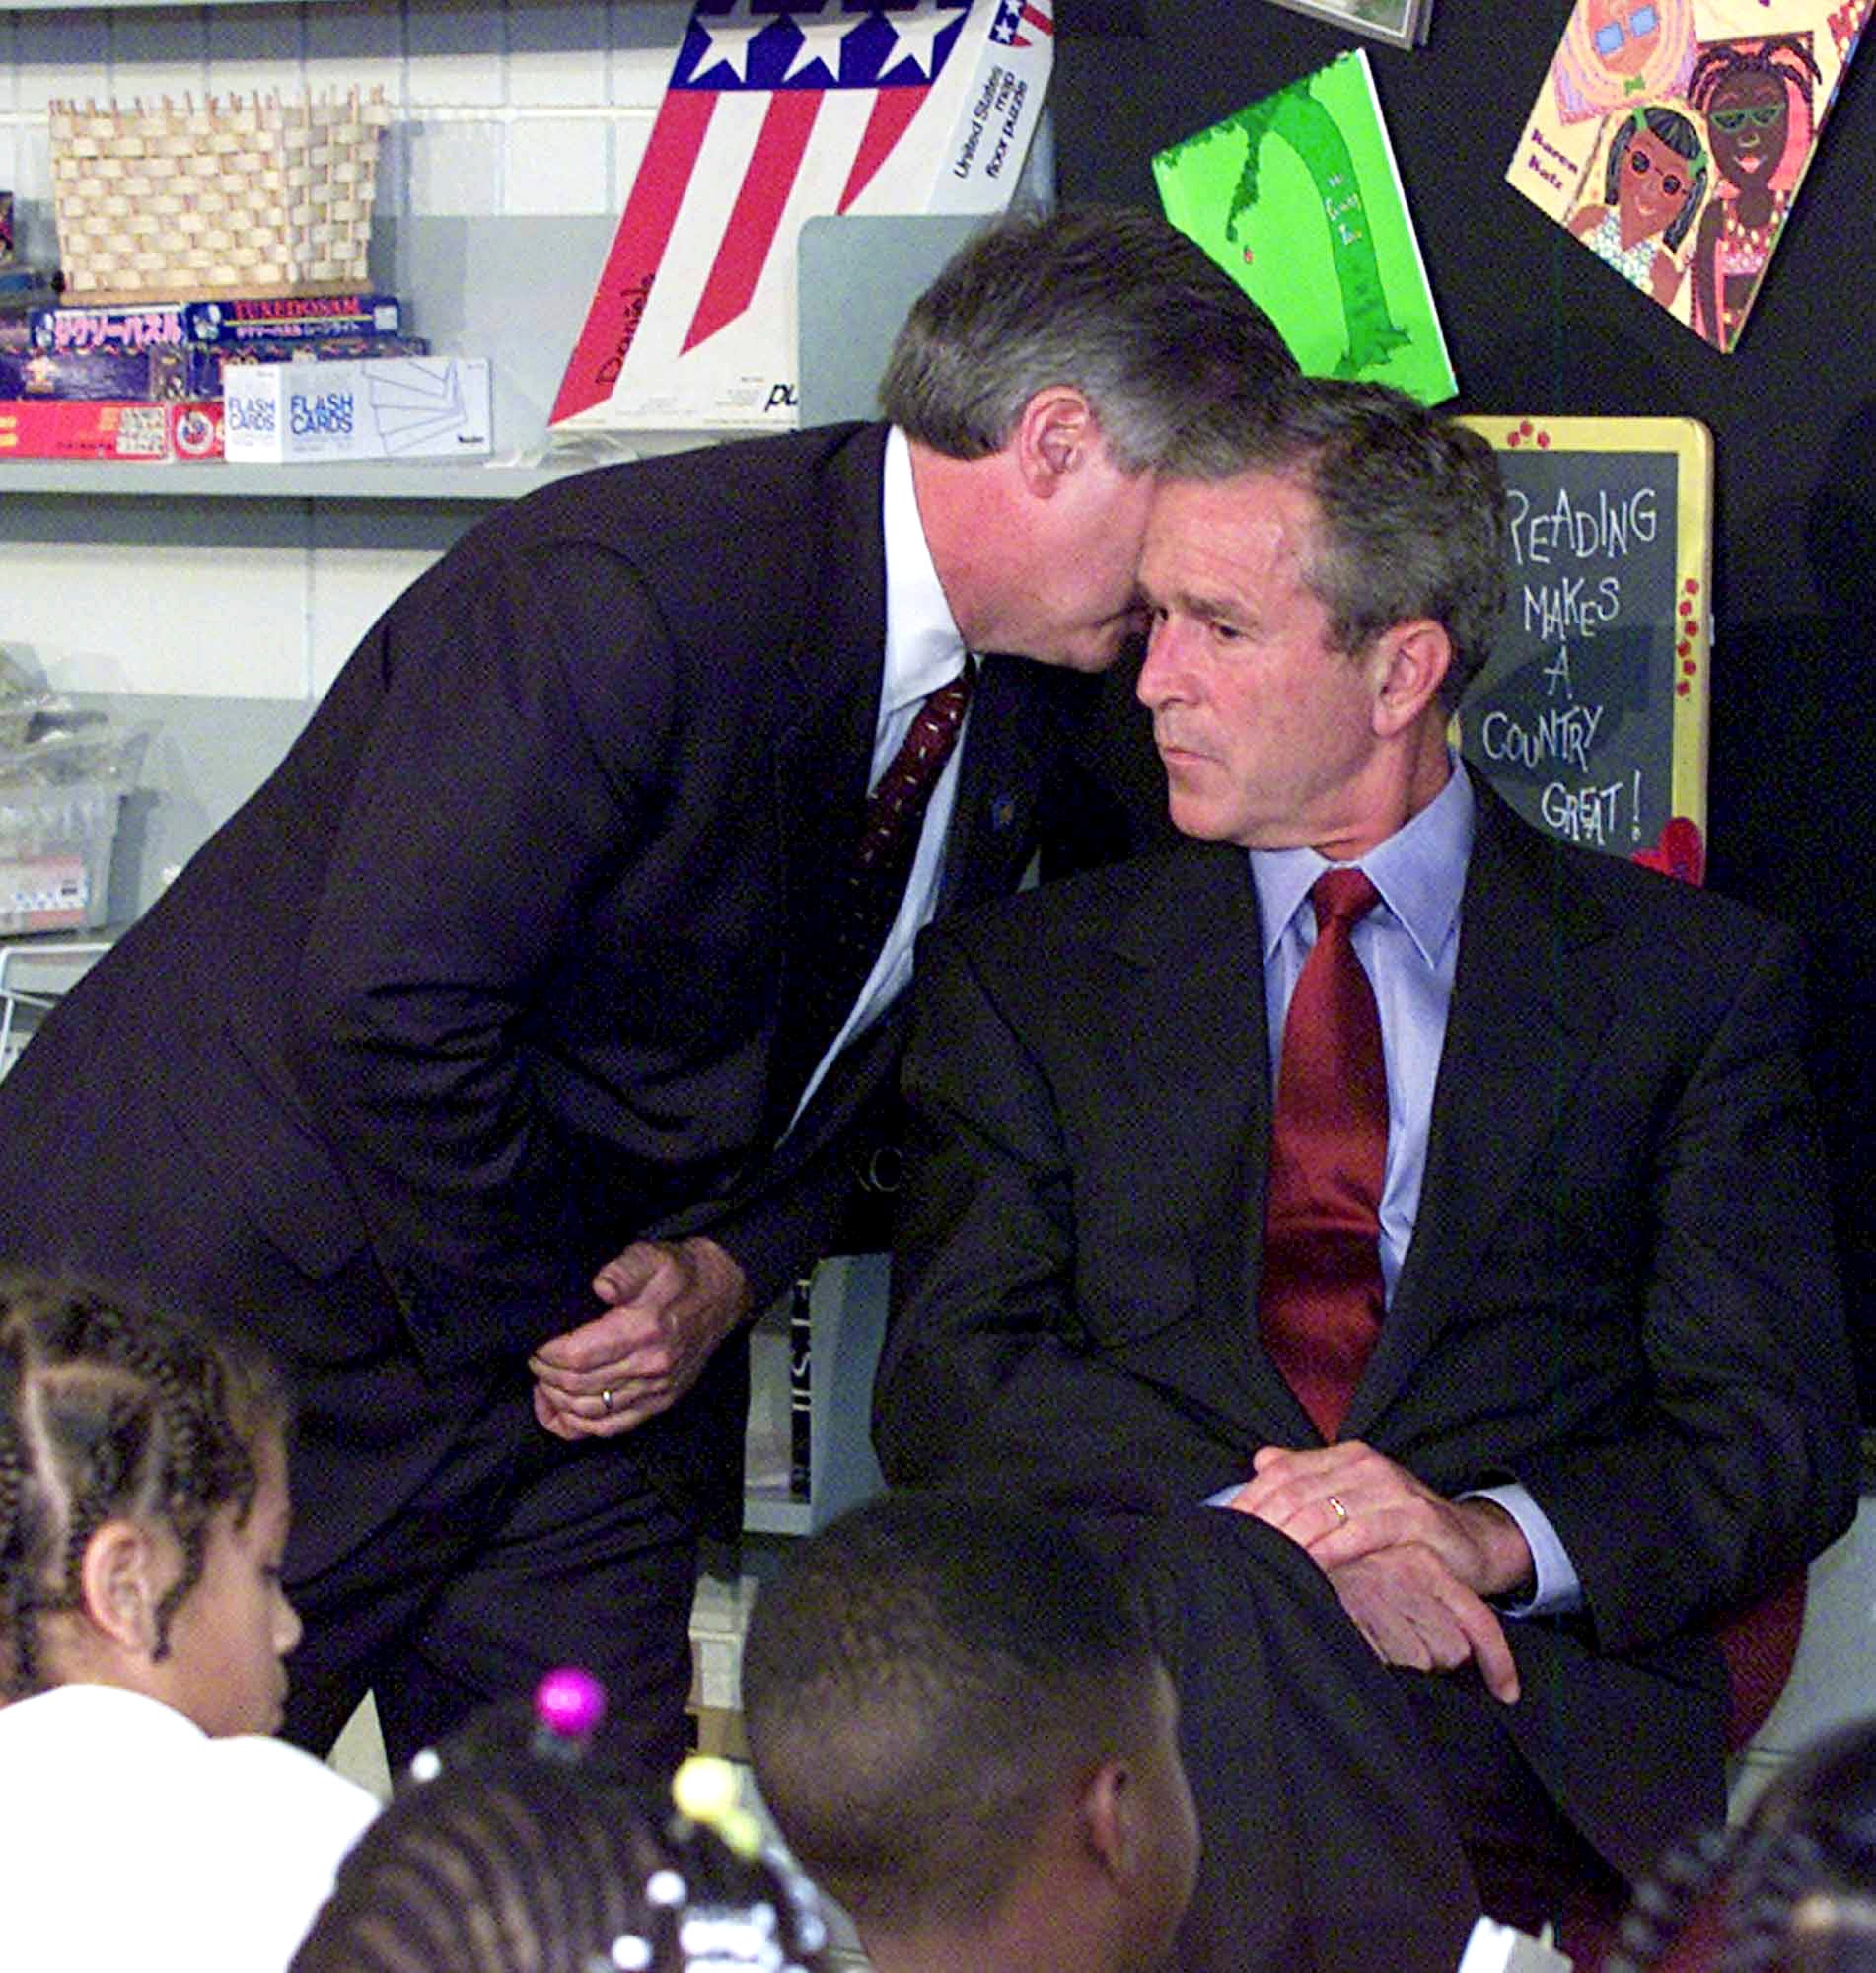 President George W. Bush's Chief of Staff Andy Card whispers into the ear of the president, giving him word of the plane crashes into the World Trade Center, during a visit to the Emma E. Booker Elementary School in Sarasota, Fla.